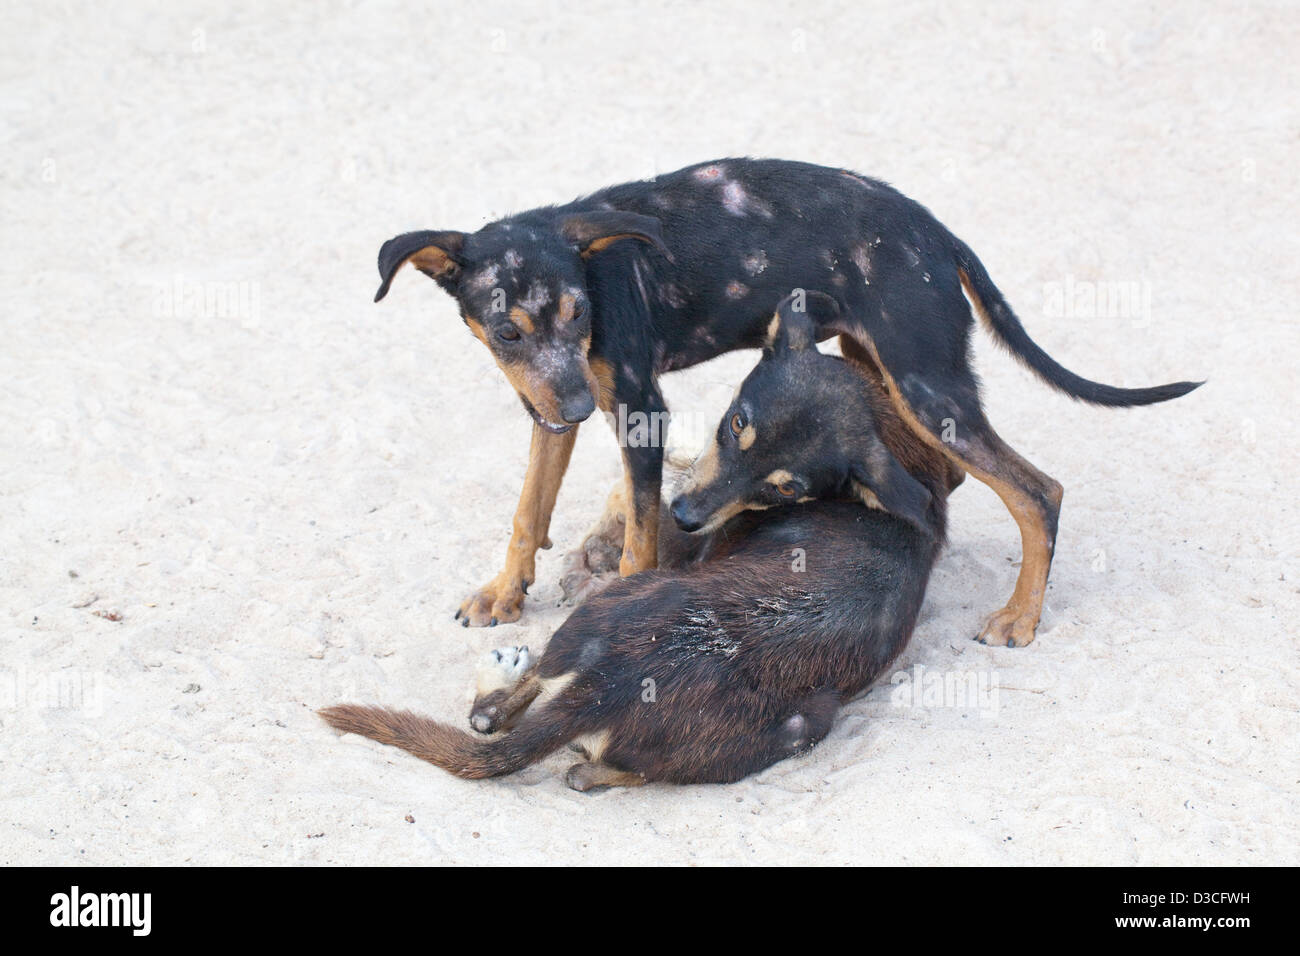 Domestic village 'Bush' Dogs (Canis lupus familiaris). Semi-feral well grown puppies at play. Covered in skin lesions. Stock Photo